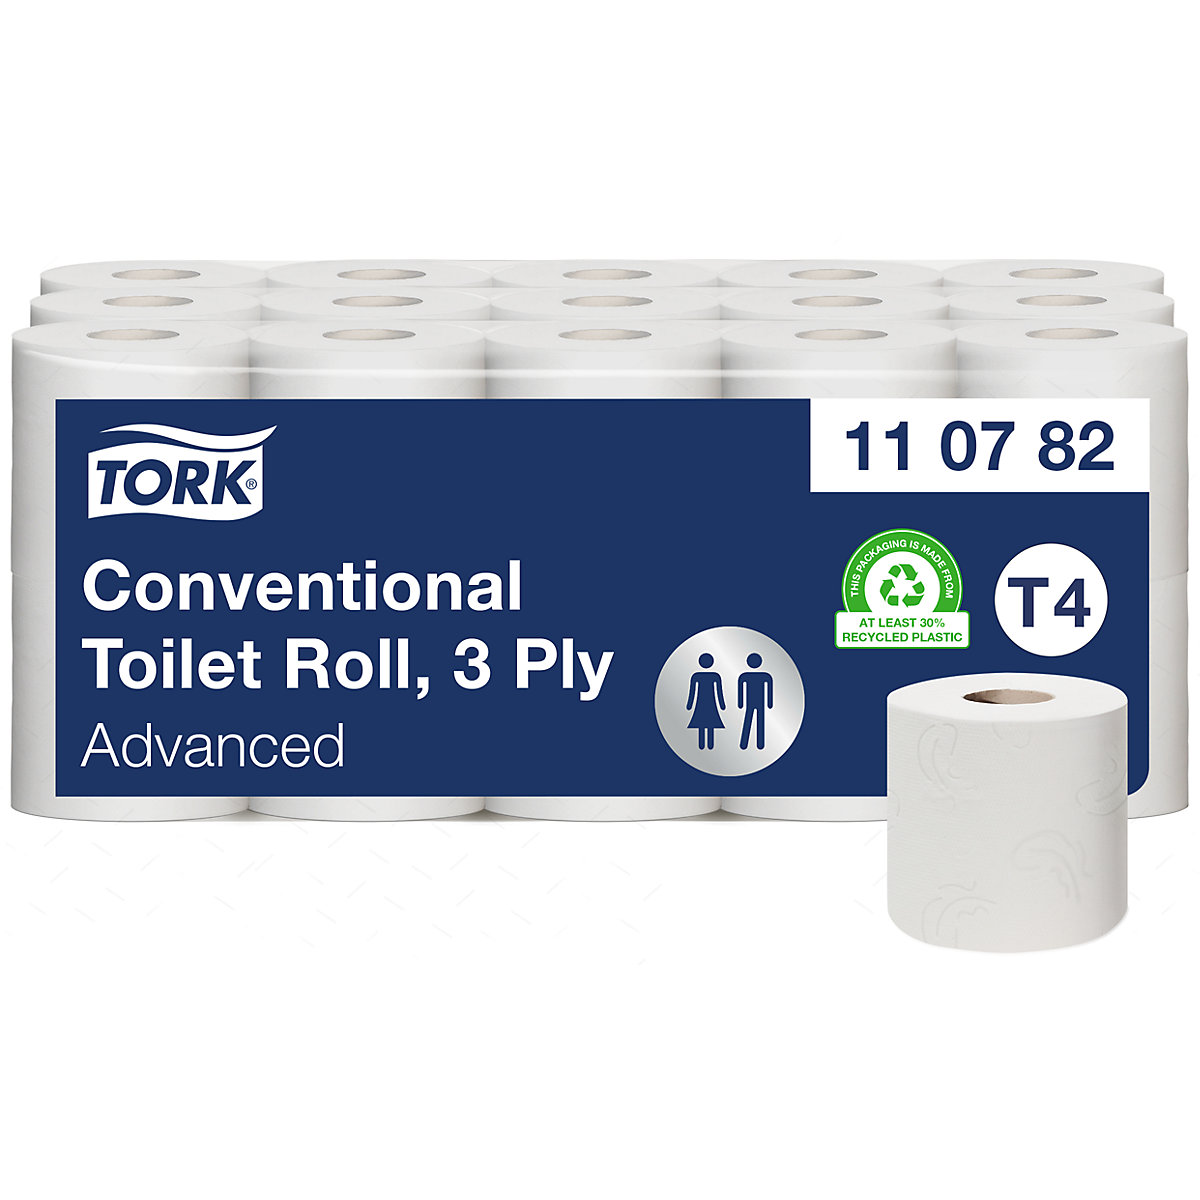 Small rolls of toilet paper, household roll - TORK